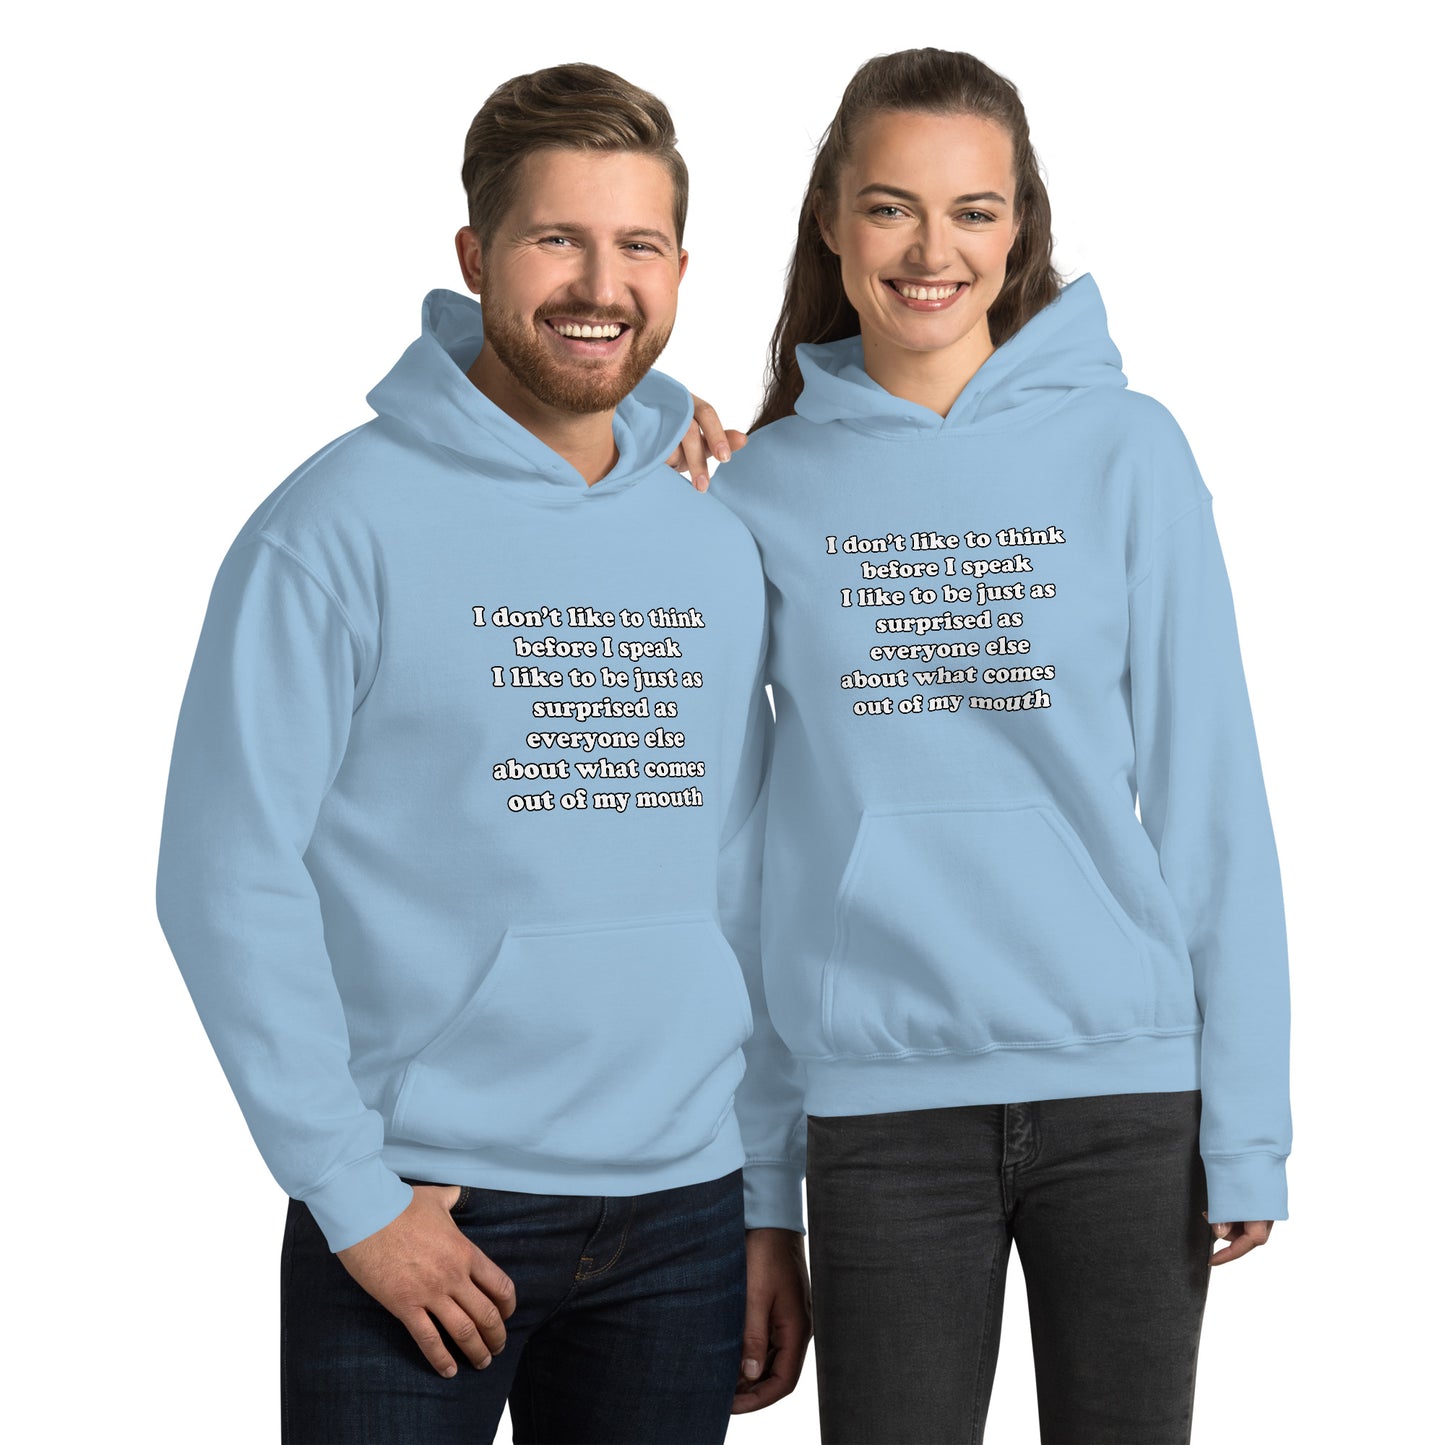 Man and woman with light blue hoodie with text “I don't think before I speak Just as serprised as everyone about what comes out of my mouth"